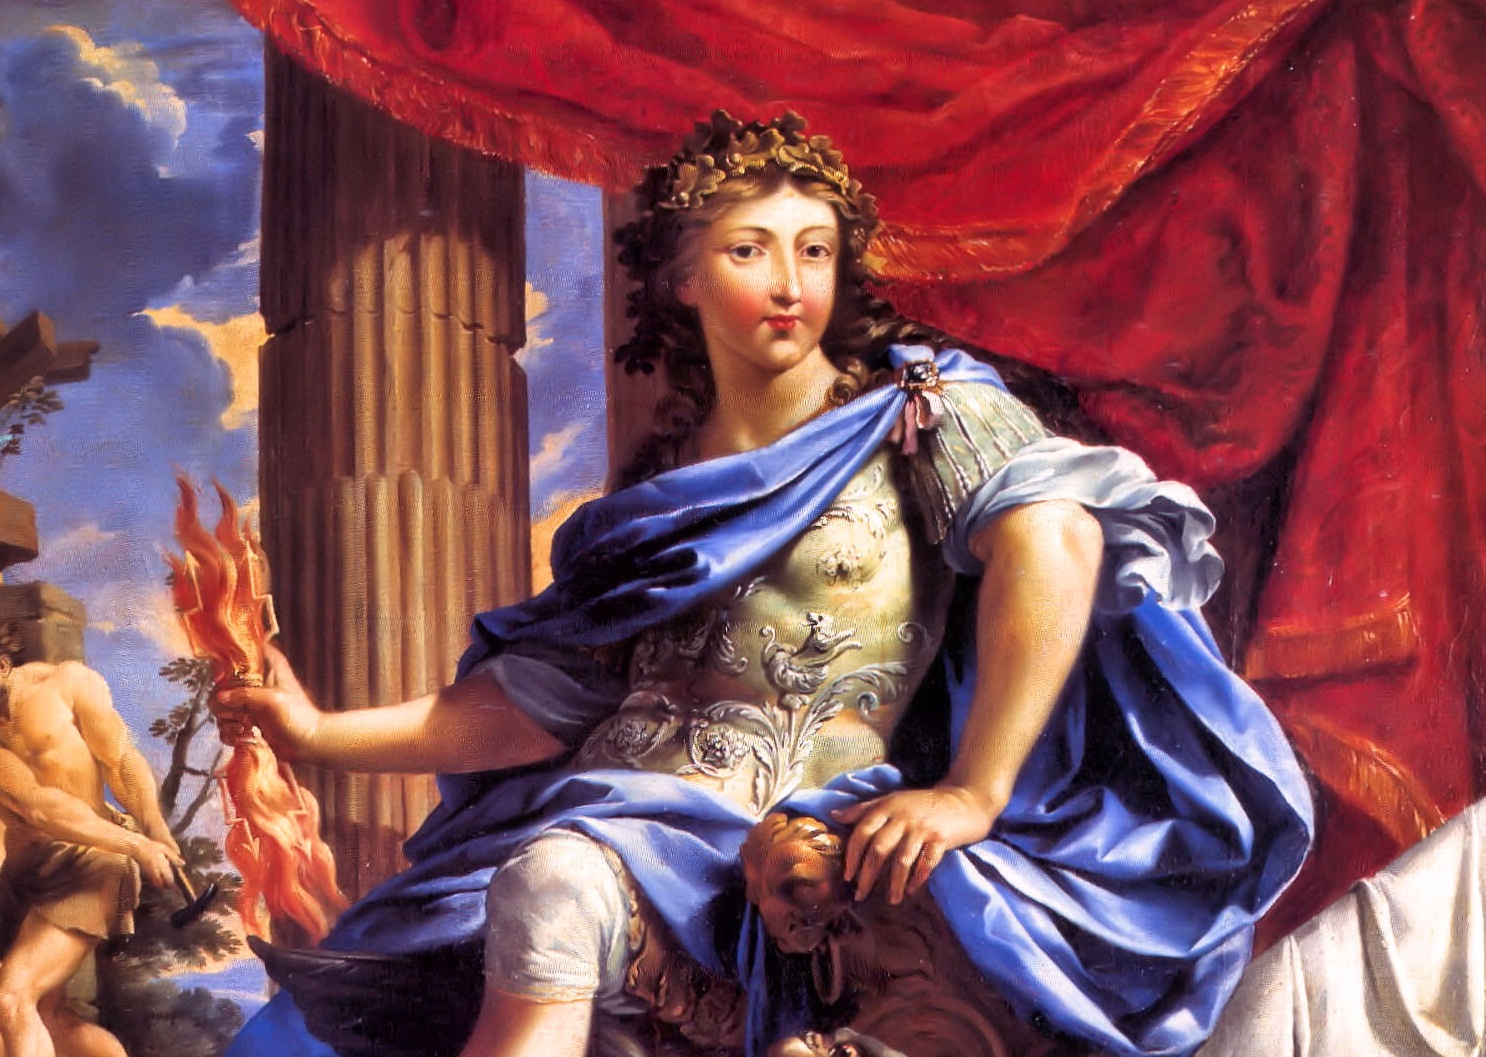 1638: Birth of the French King Louis XIV – the Most Powerful Ruler in Europe | www.bagssaleusa.com